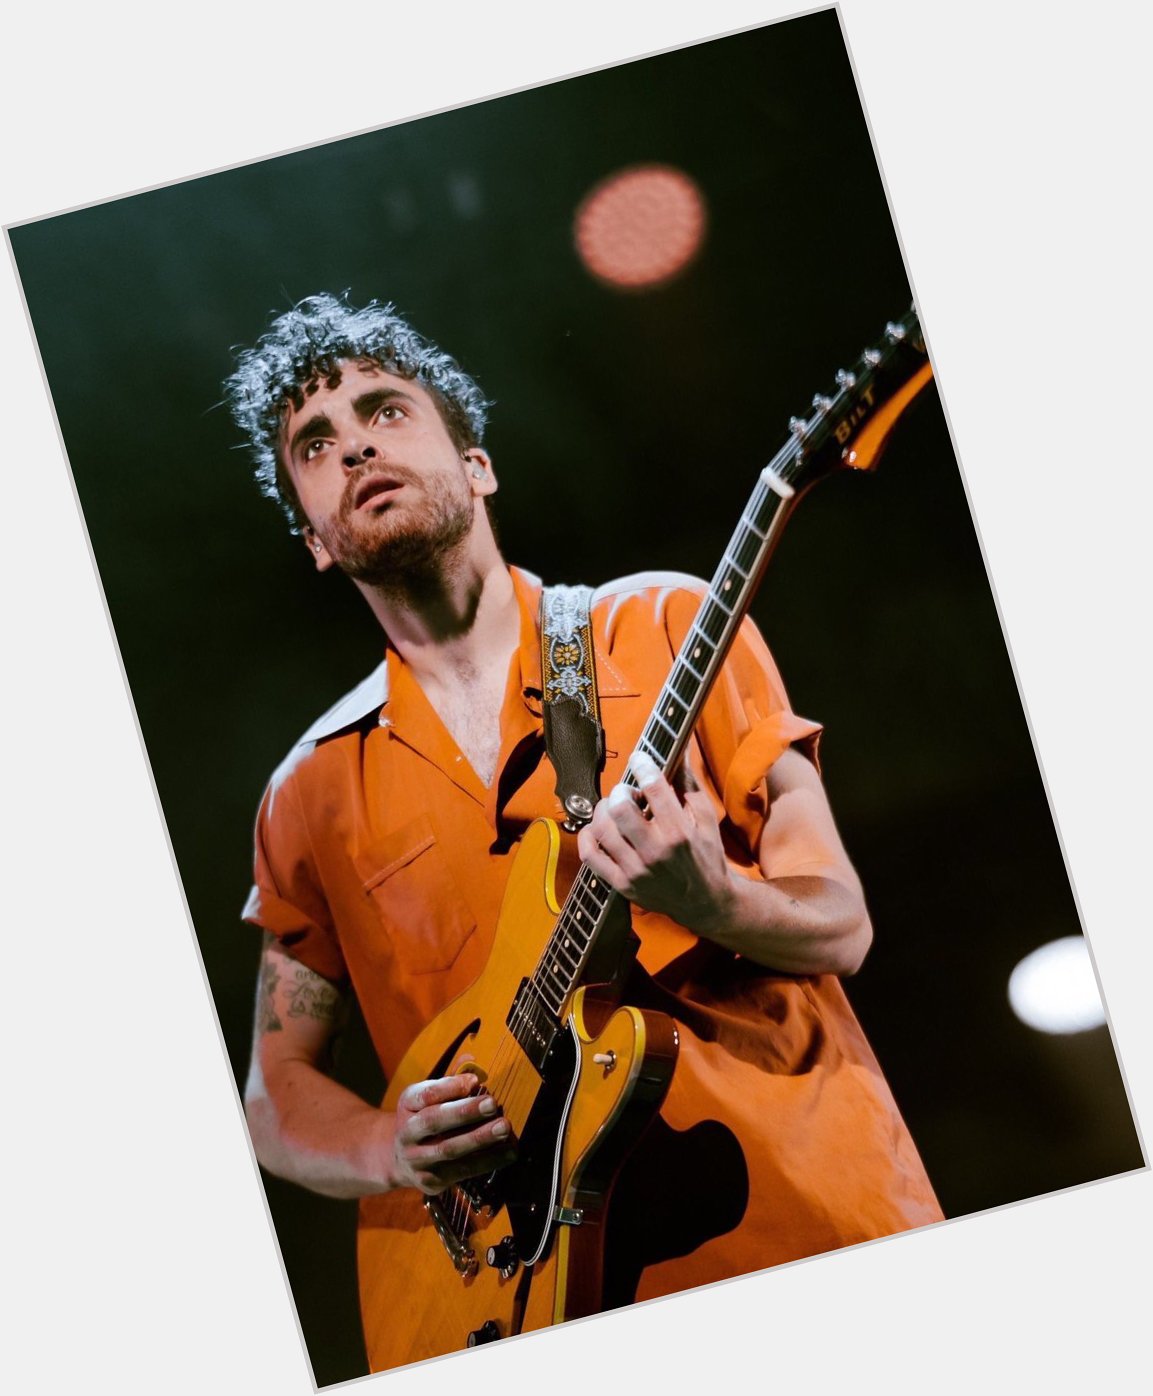 HAPPY BIRTHDAY TAYLOR YORK THAMK U FOR PRODUCING AND PLAYING GUITAR ON THE BEST PARAMORE ALBUMS 